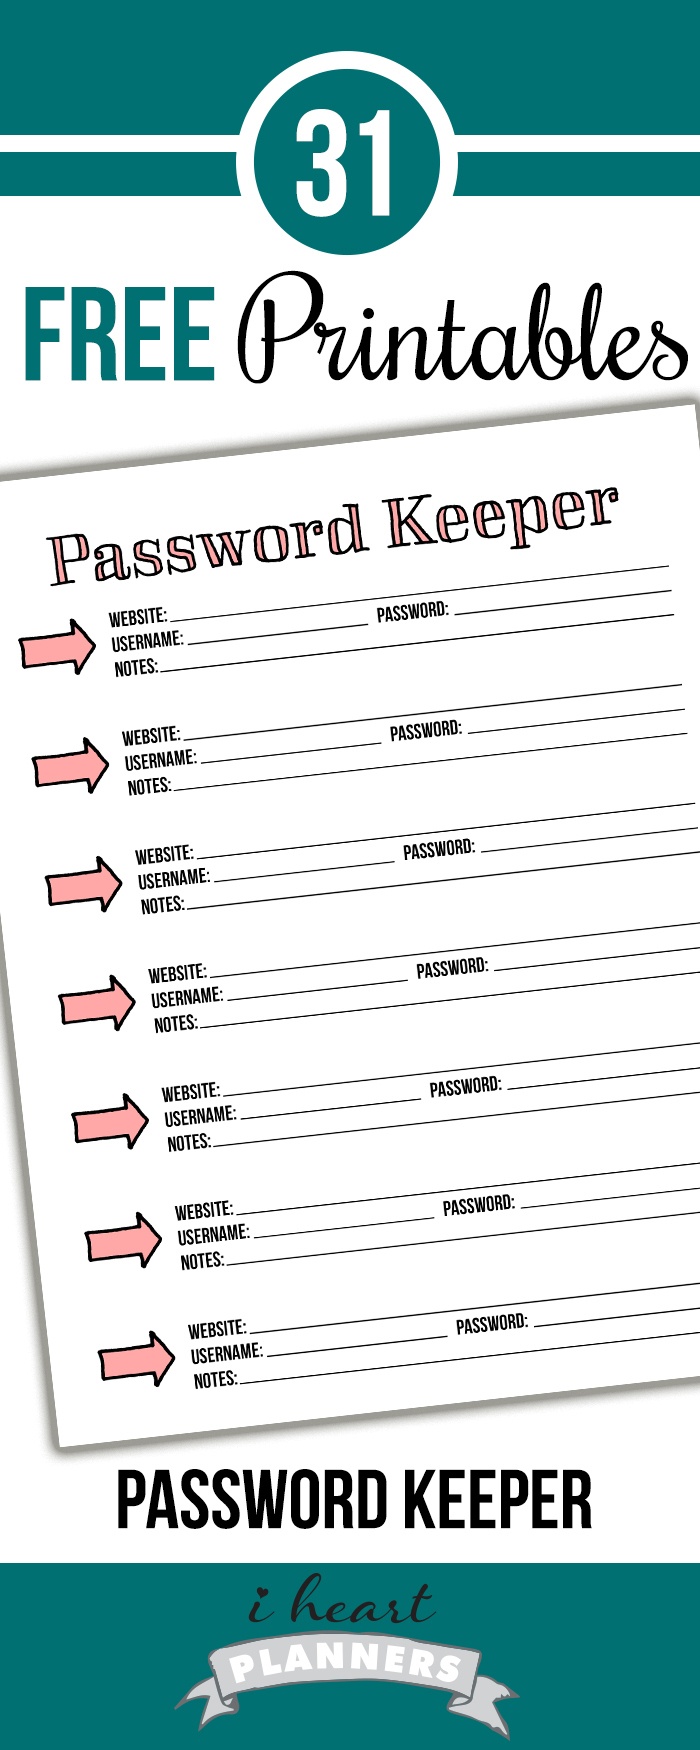 Day 6: Password Keeper - I Heart Planners - Free Printable Password Keeper